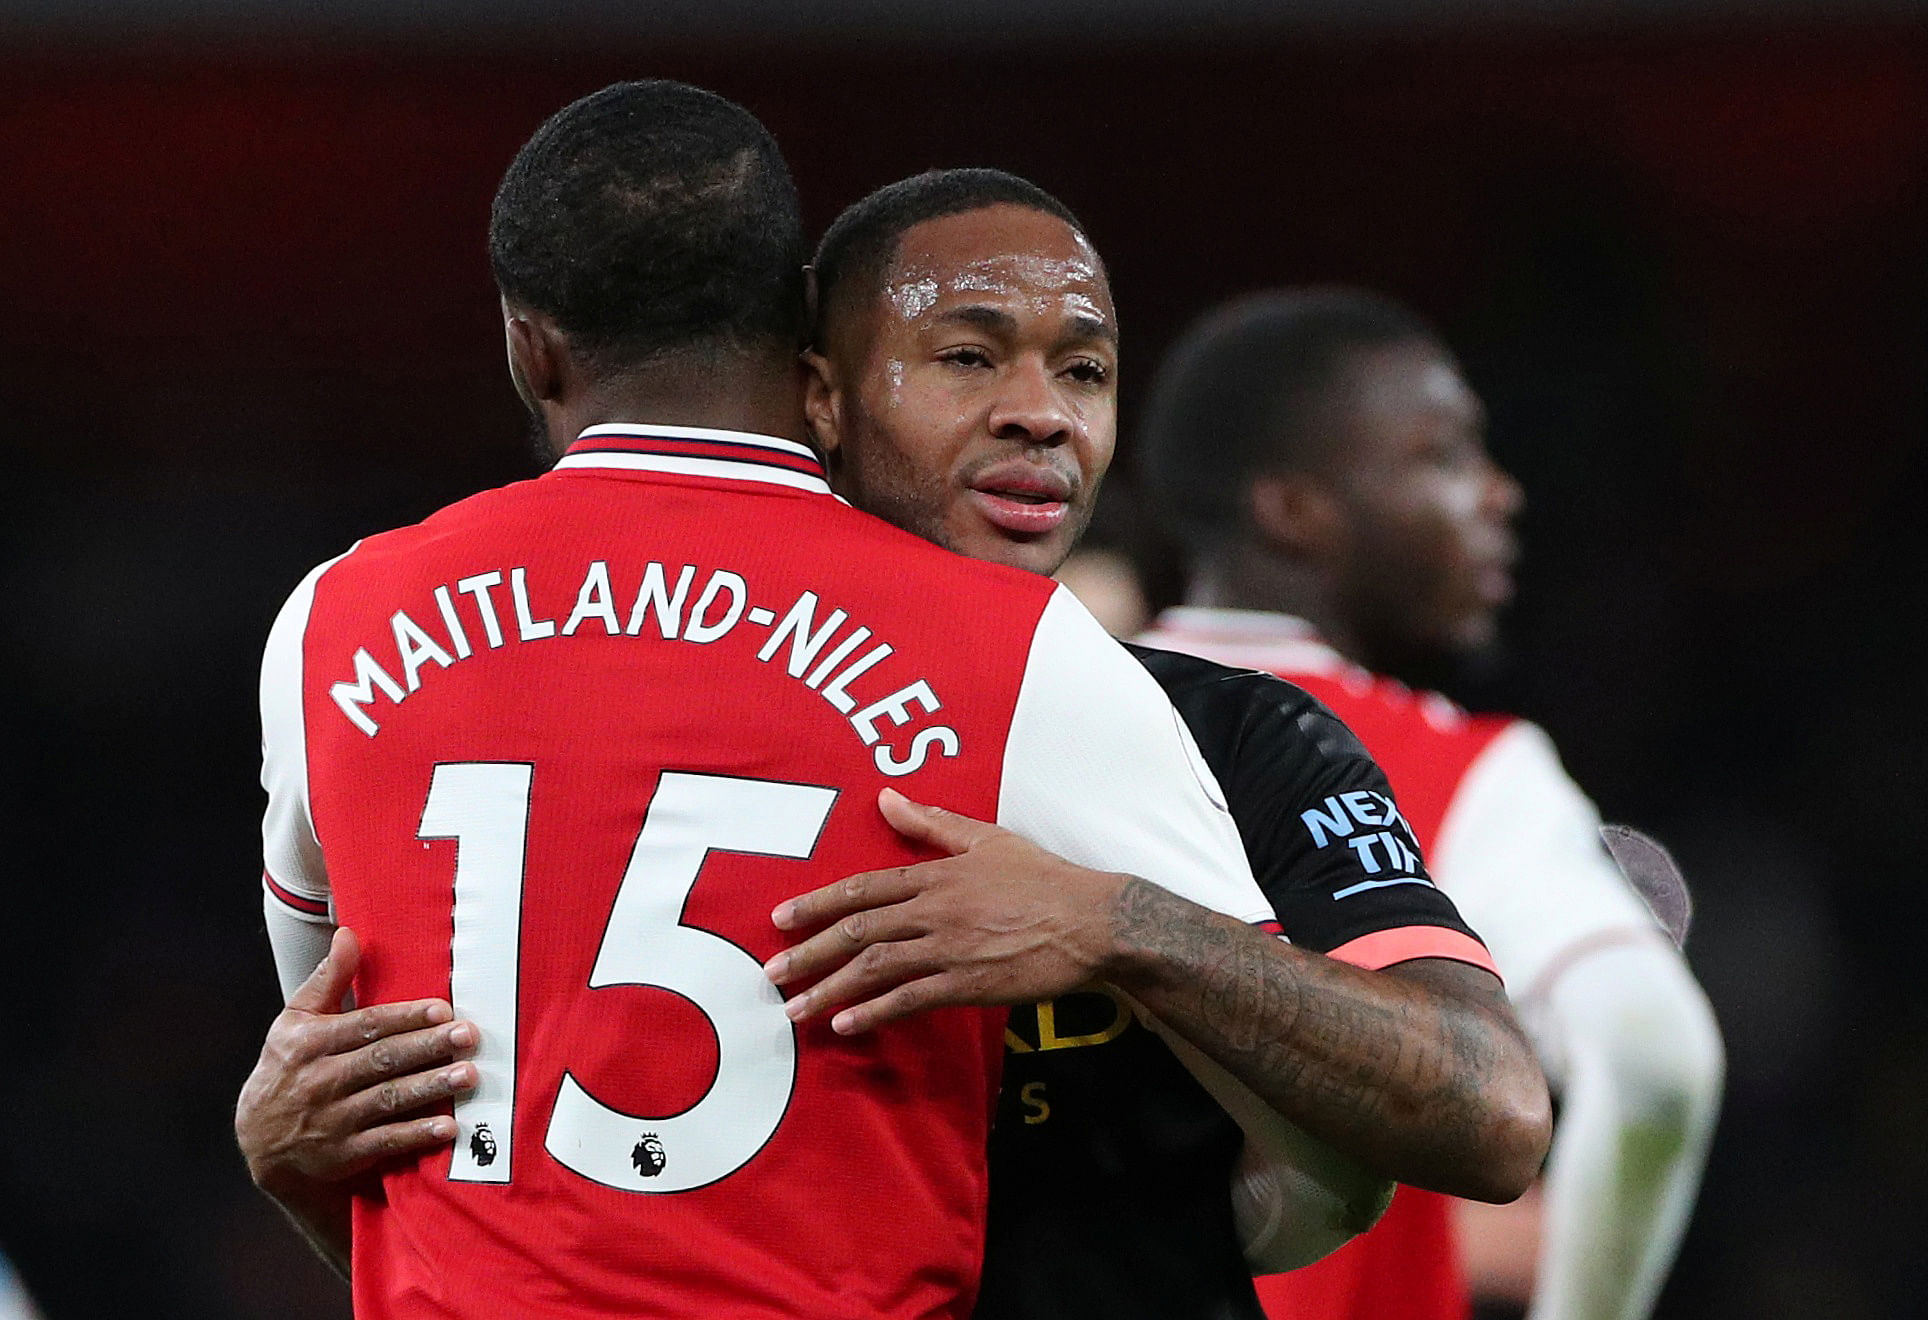 Manchester City's Raheem Sterling and Arsenal's Ainsley Maitland-Niles after the match. (Reuters Photo)